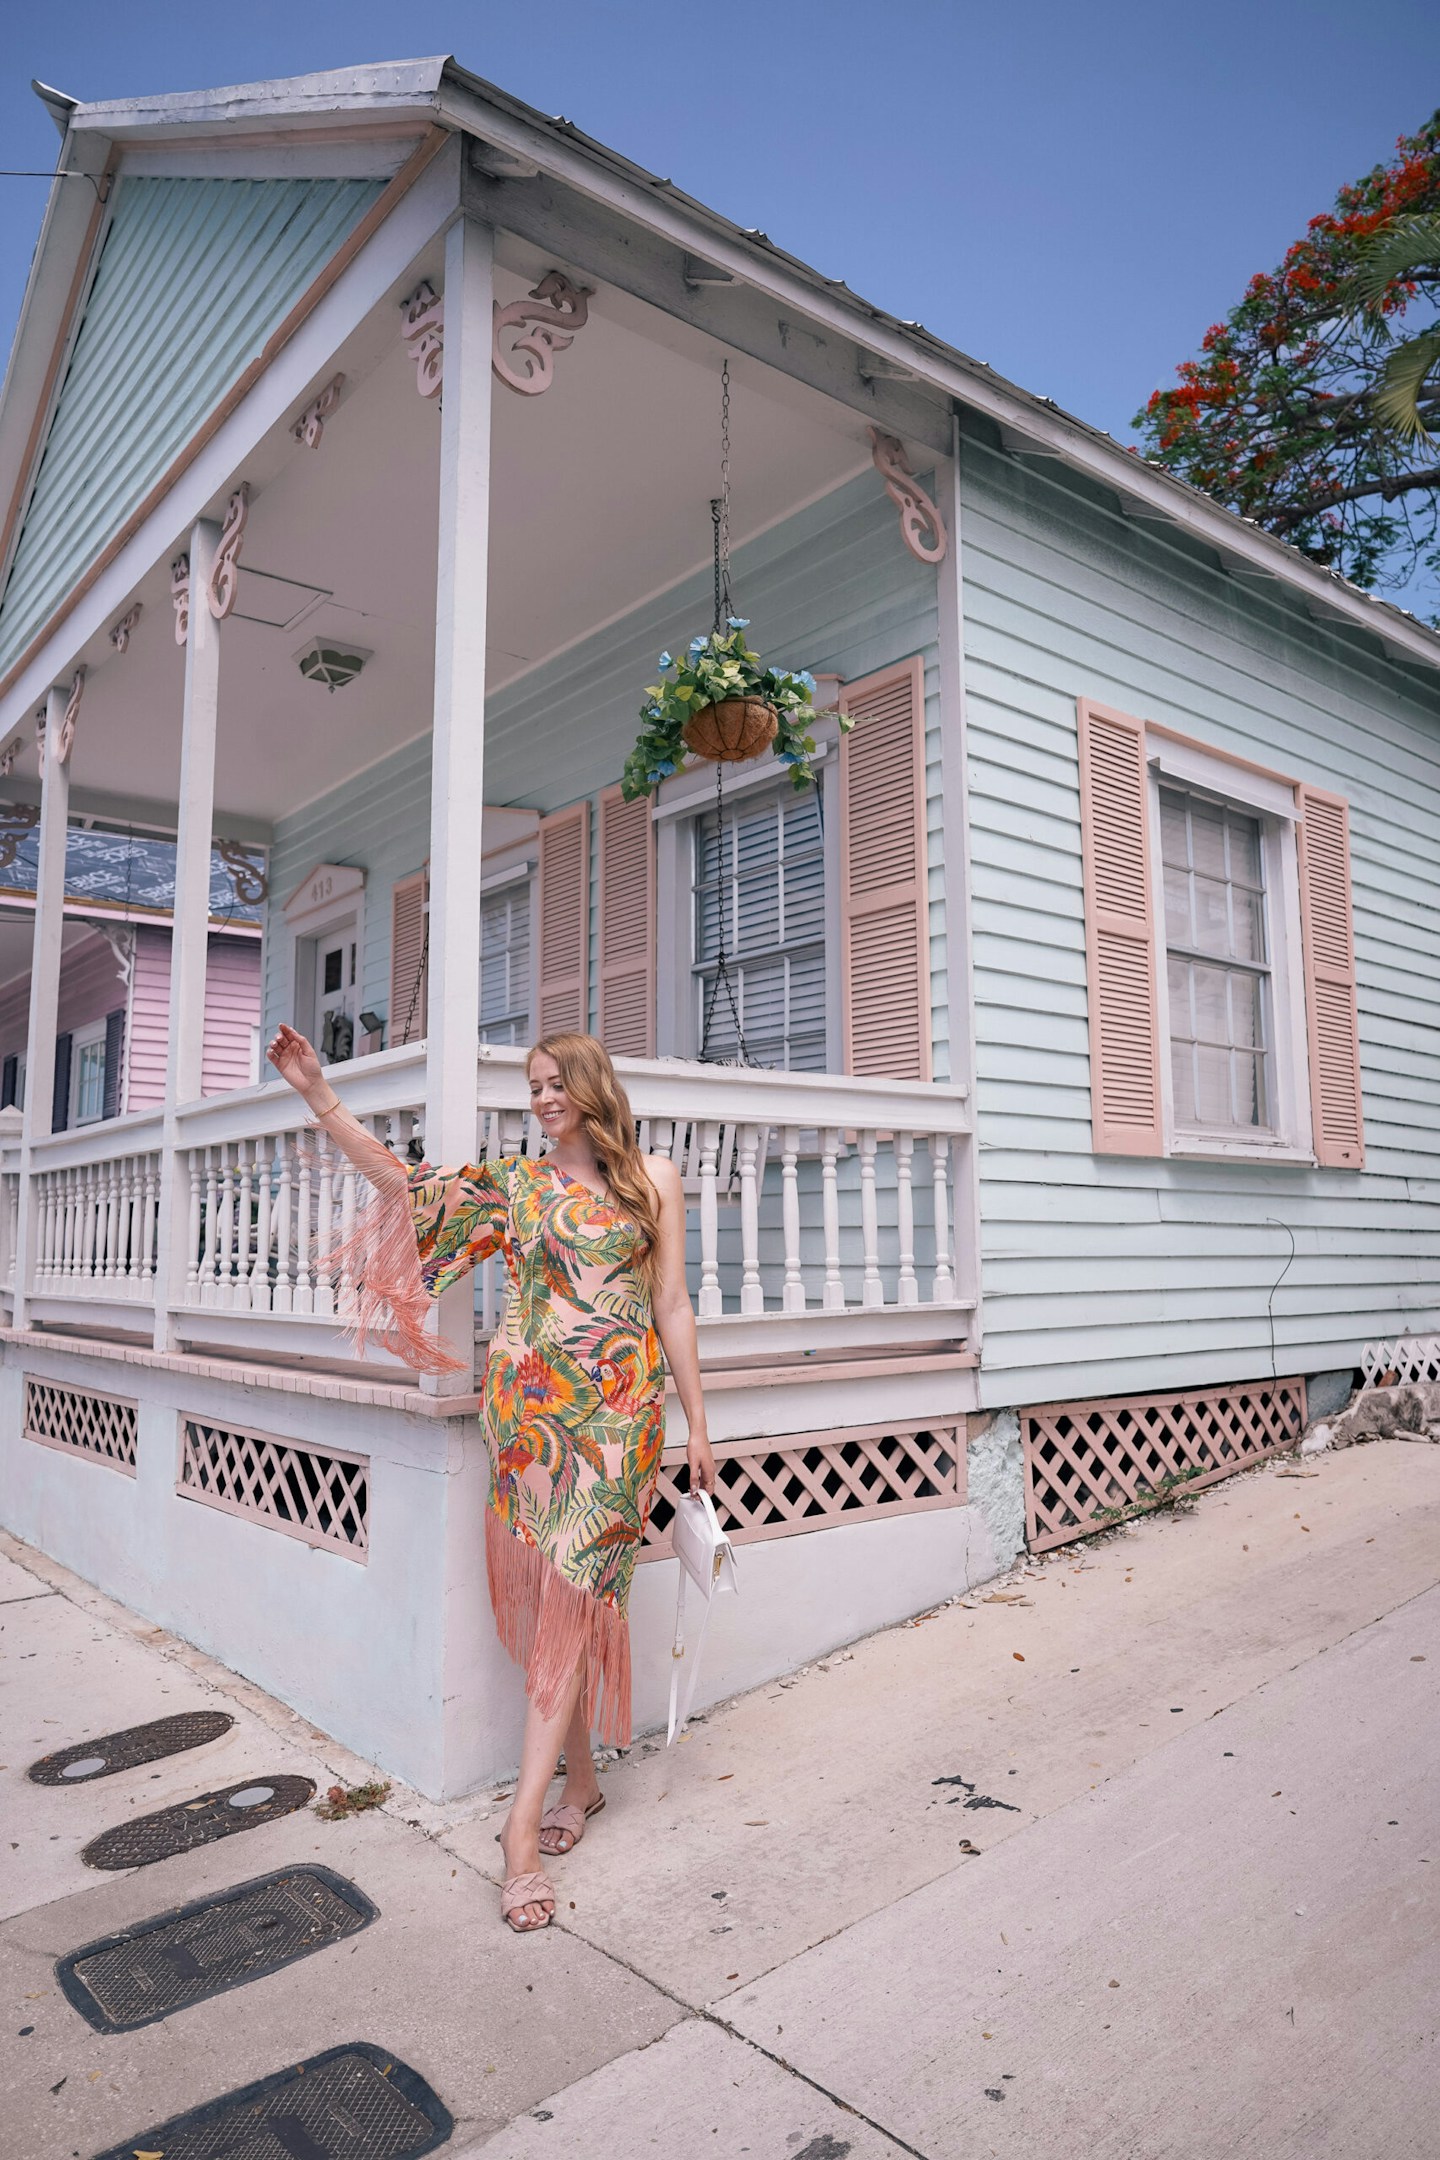 The charming pastel houses in Key West Florida are so beautiful - get lost wandering the streets of Key West and discovering its history as a fishing and resort town.